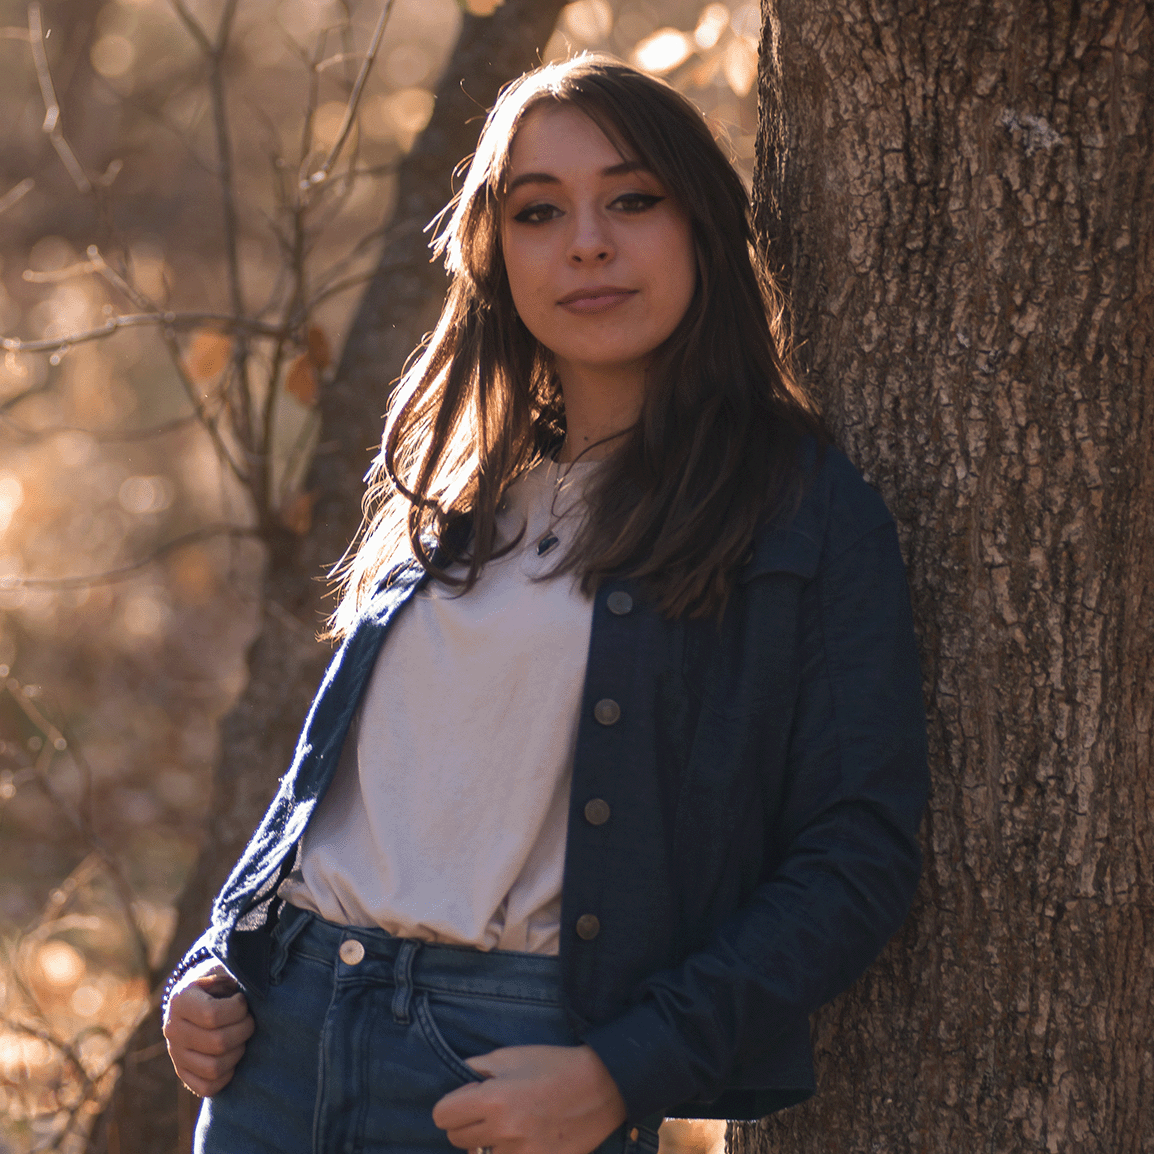 This image shows Krista leaning against a tree. She has long dark hair and is dressed in a jean flannel and a white sweater. She is smiling at the camera